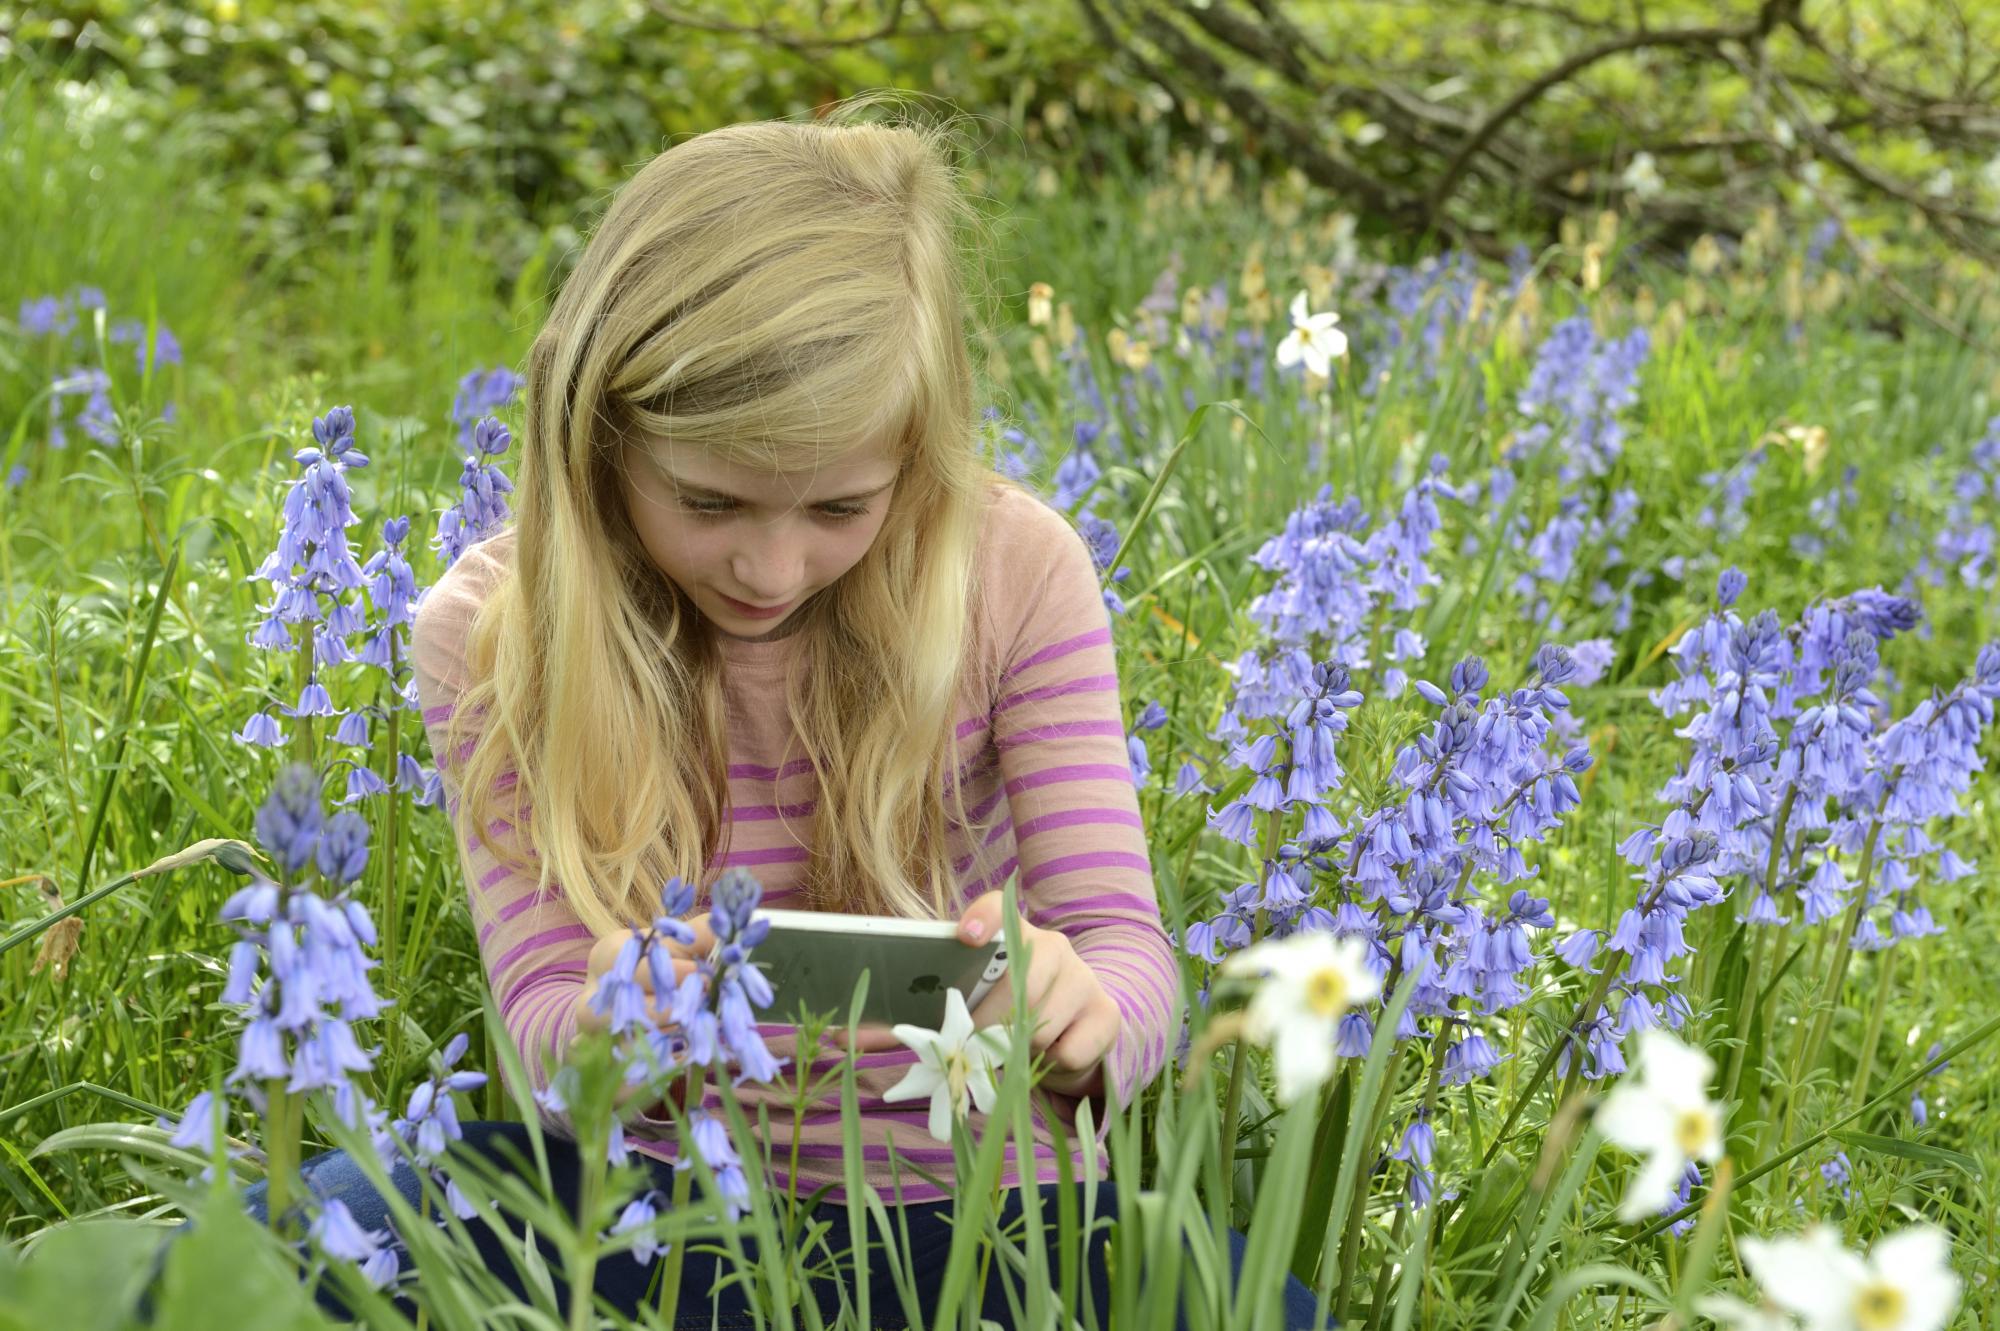 Girl photographing bluebells flowers